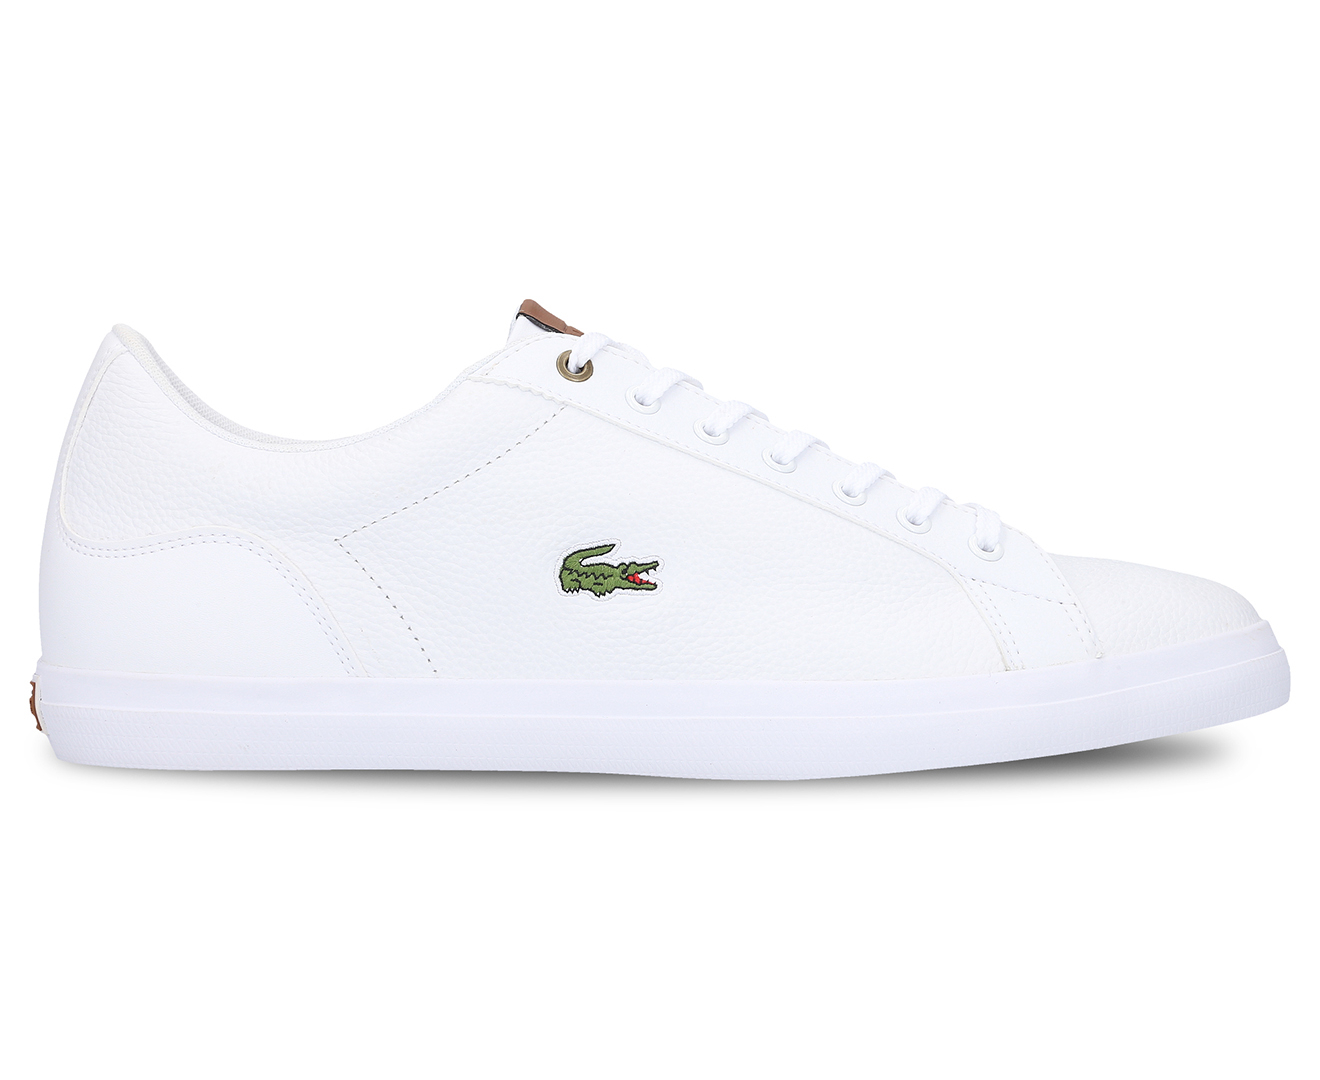 Lacoste Men's Lerond 419 6 JD CMA Sneakers - White/Brown | Catch.co.nz